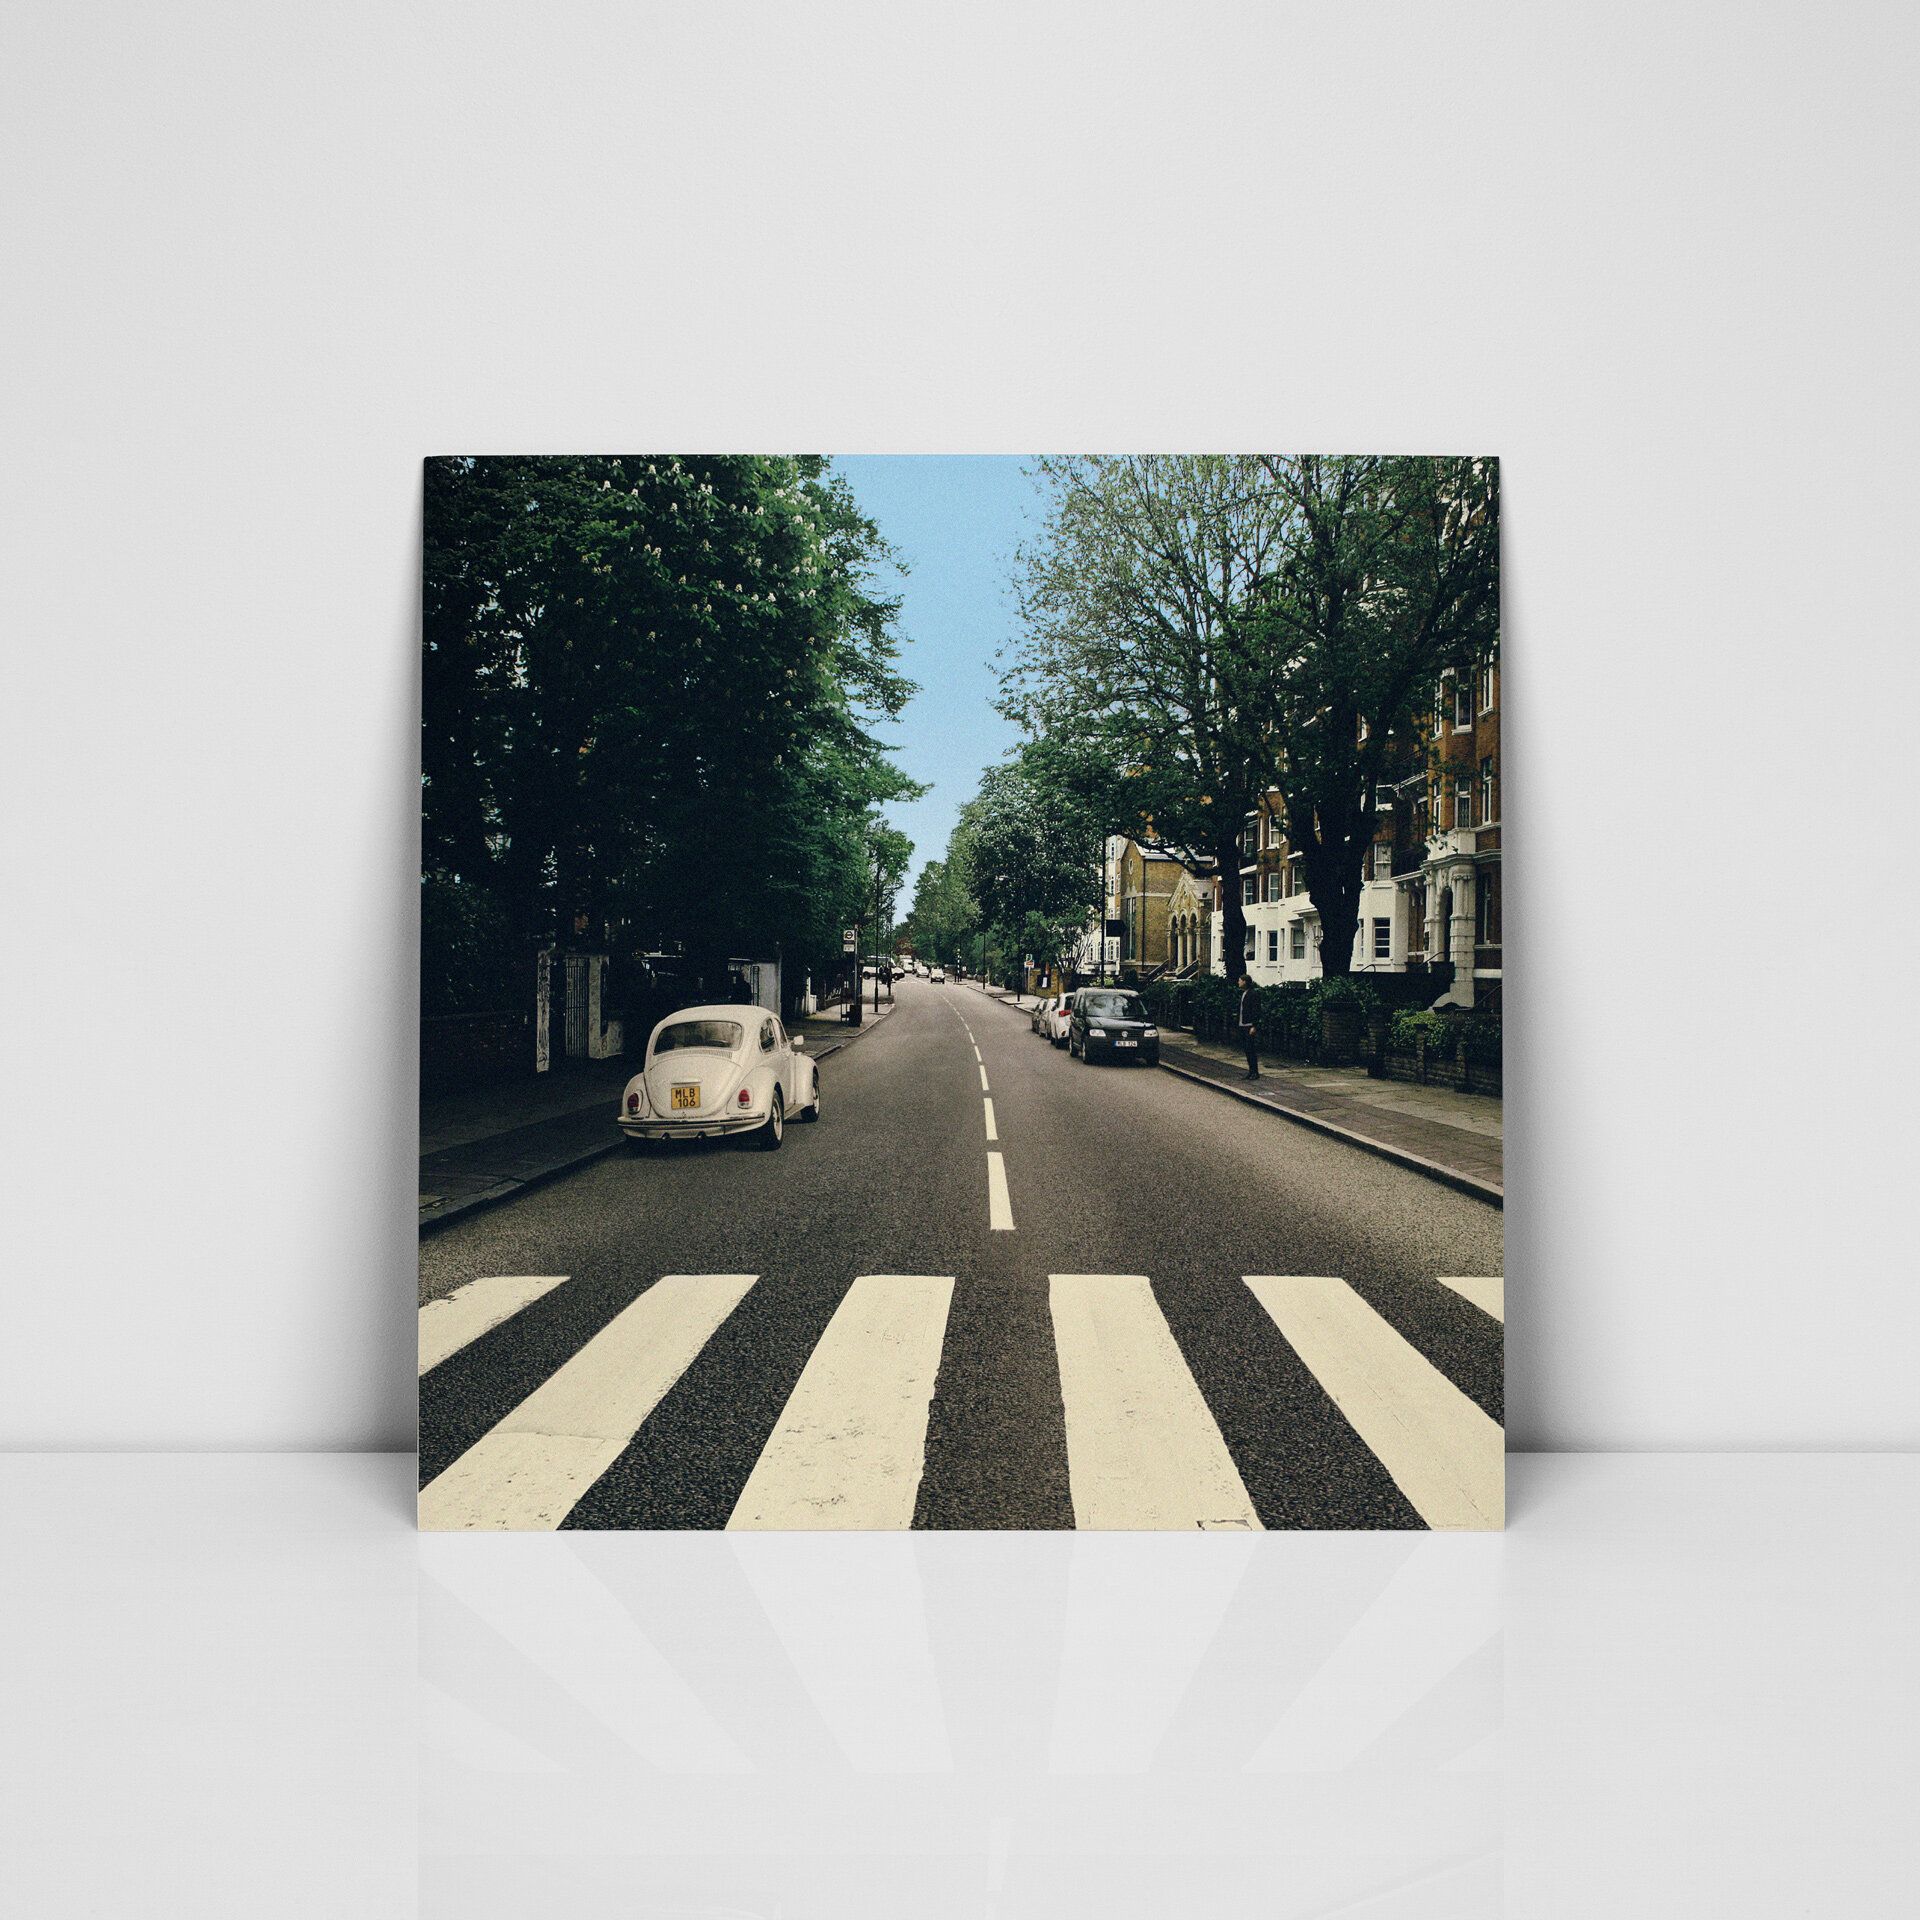 Outtakes from Beatles classic Abbey Road album cover  DesignCurial